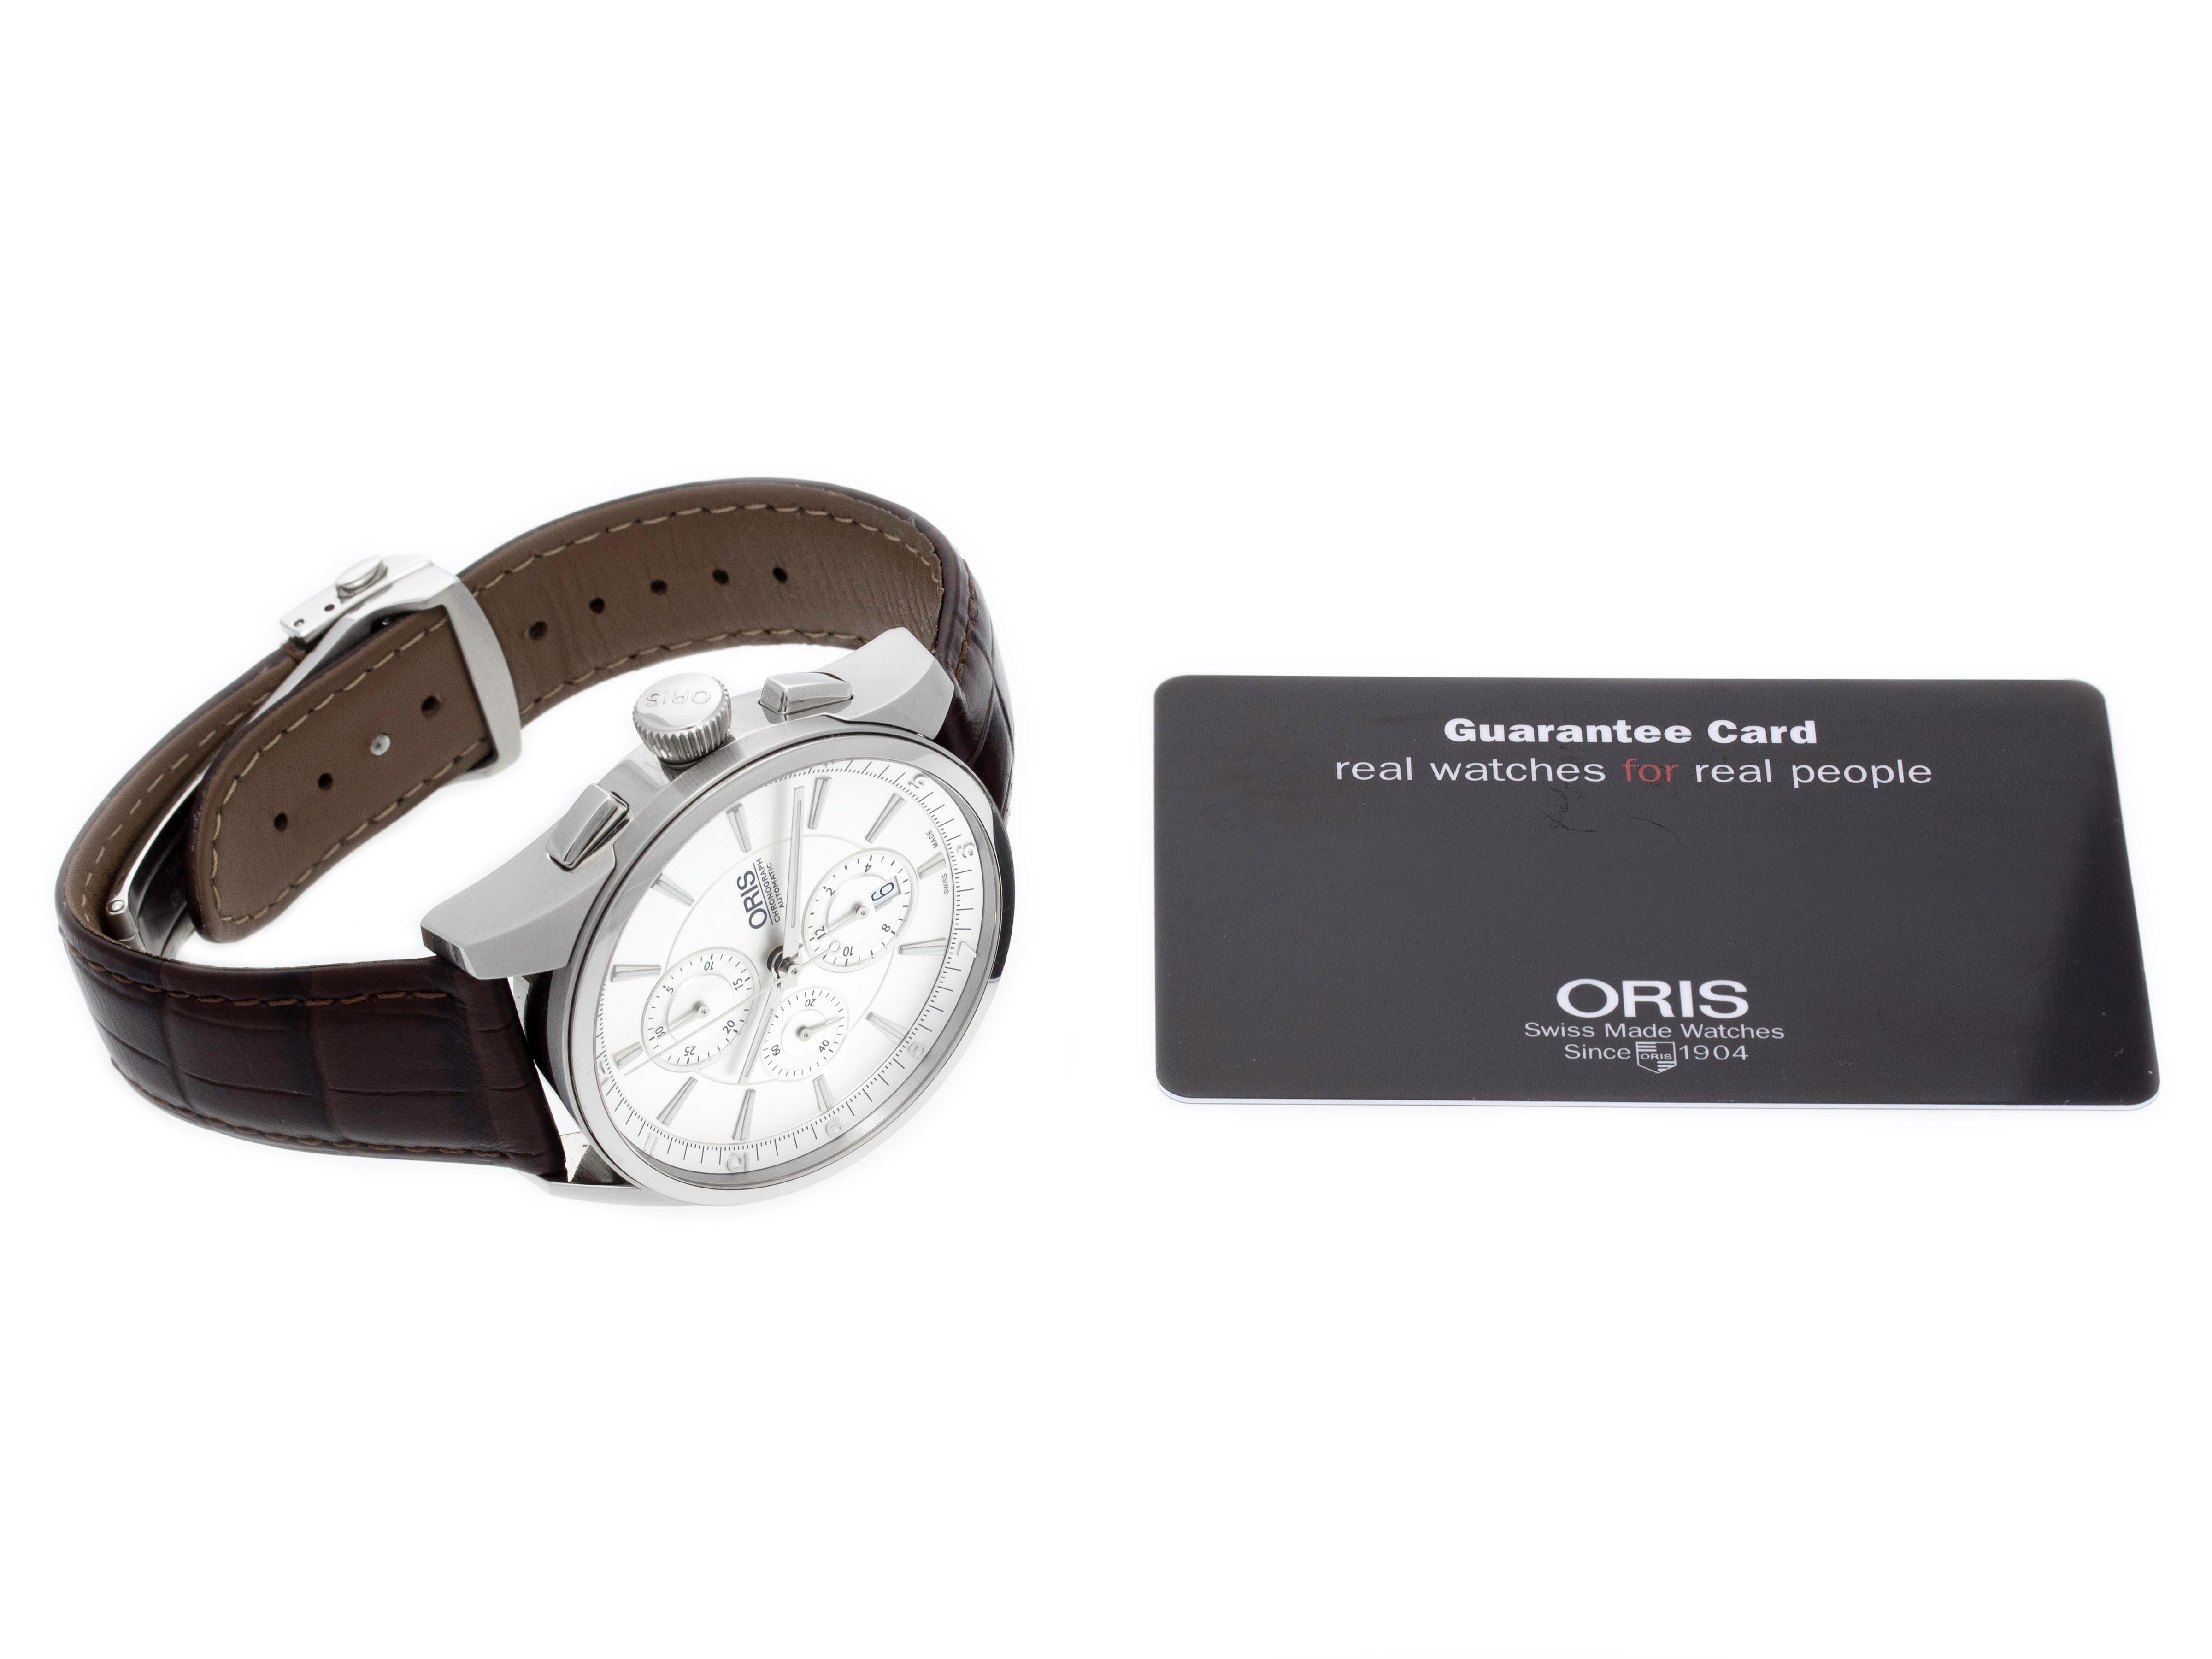 Stainless steel Oris Artix with Brown Leather Strap01 674 7644 4051-07 8 22 80FC watch, water resistance to 100m, chronograph, with date. Comes with Oris Guarantee Card.

Watch	
Brand:	Oris
Series:	Artix
Model #:	01 674 7644 4051-07 5 22